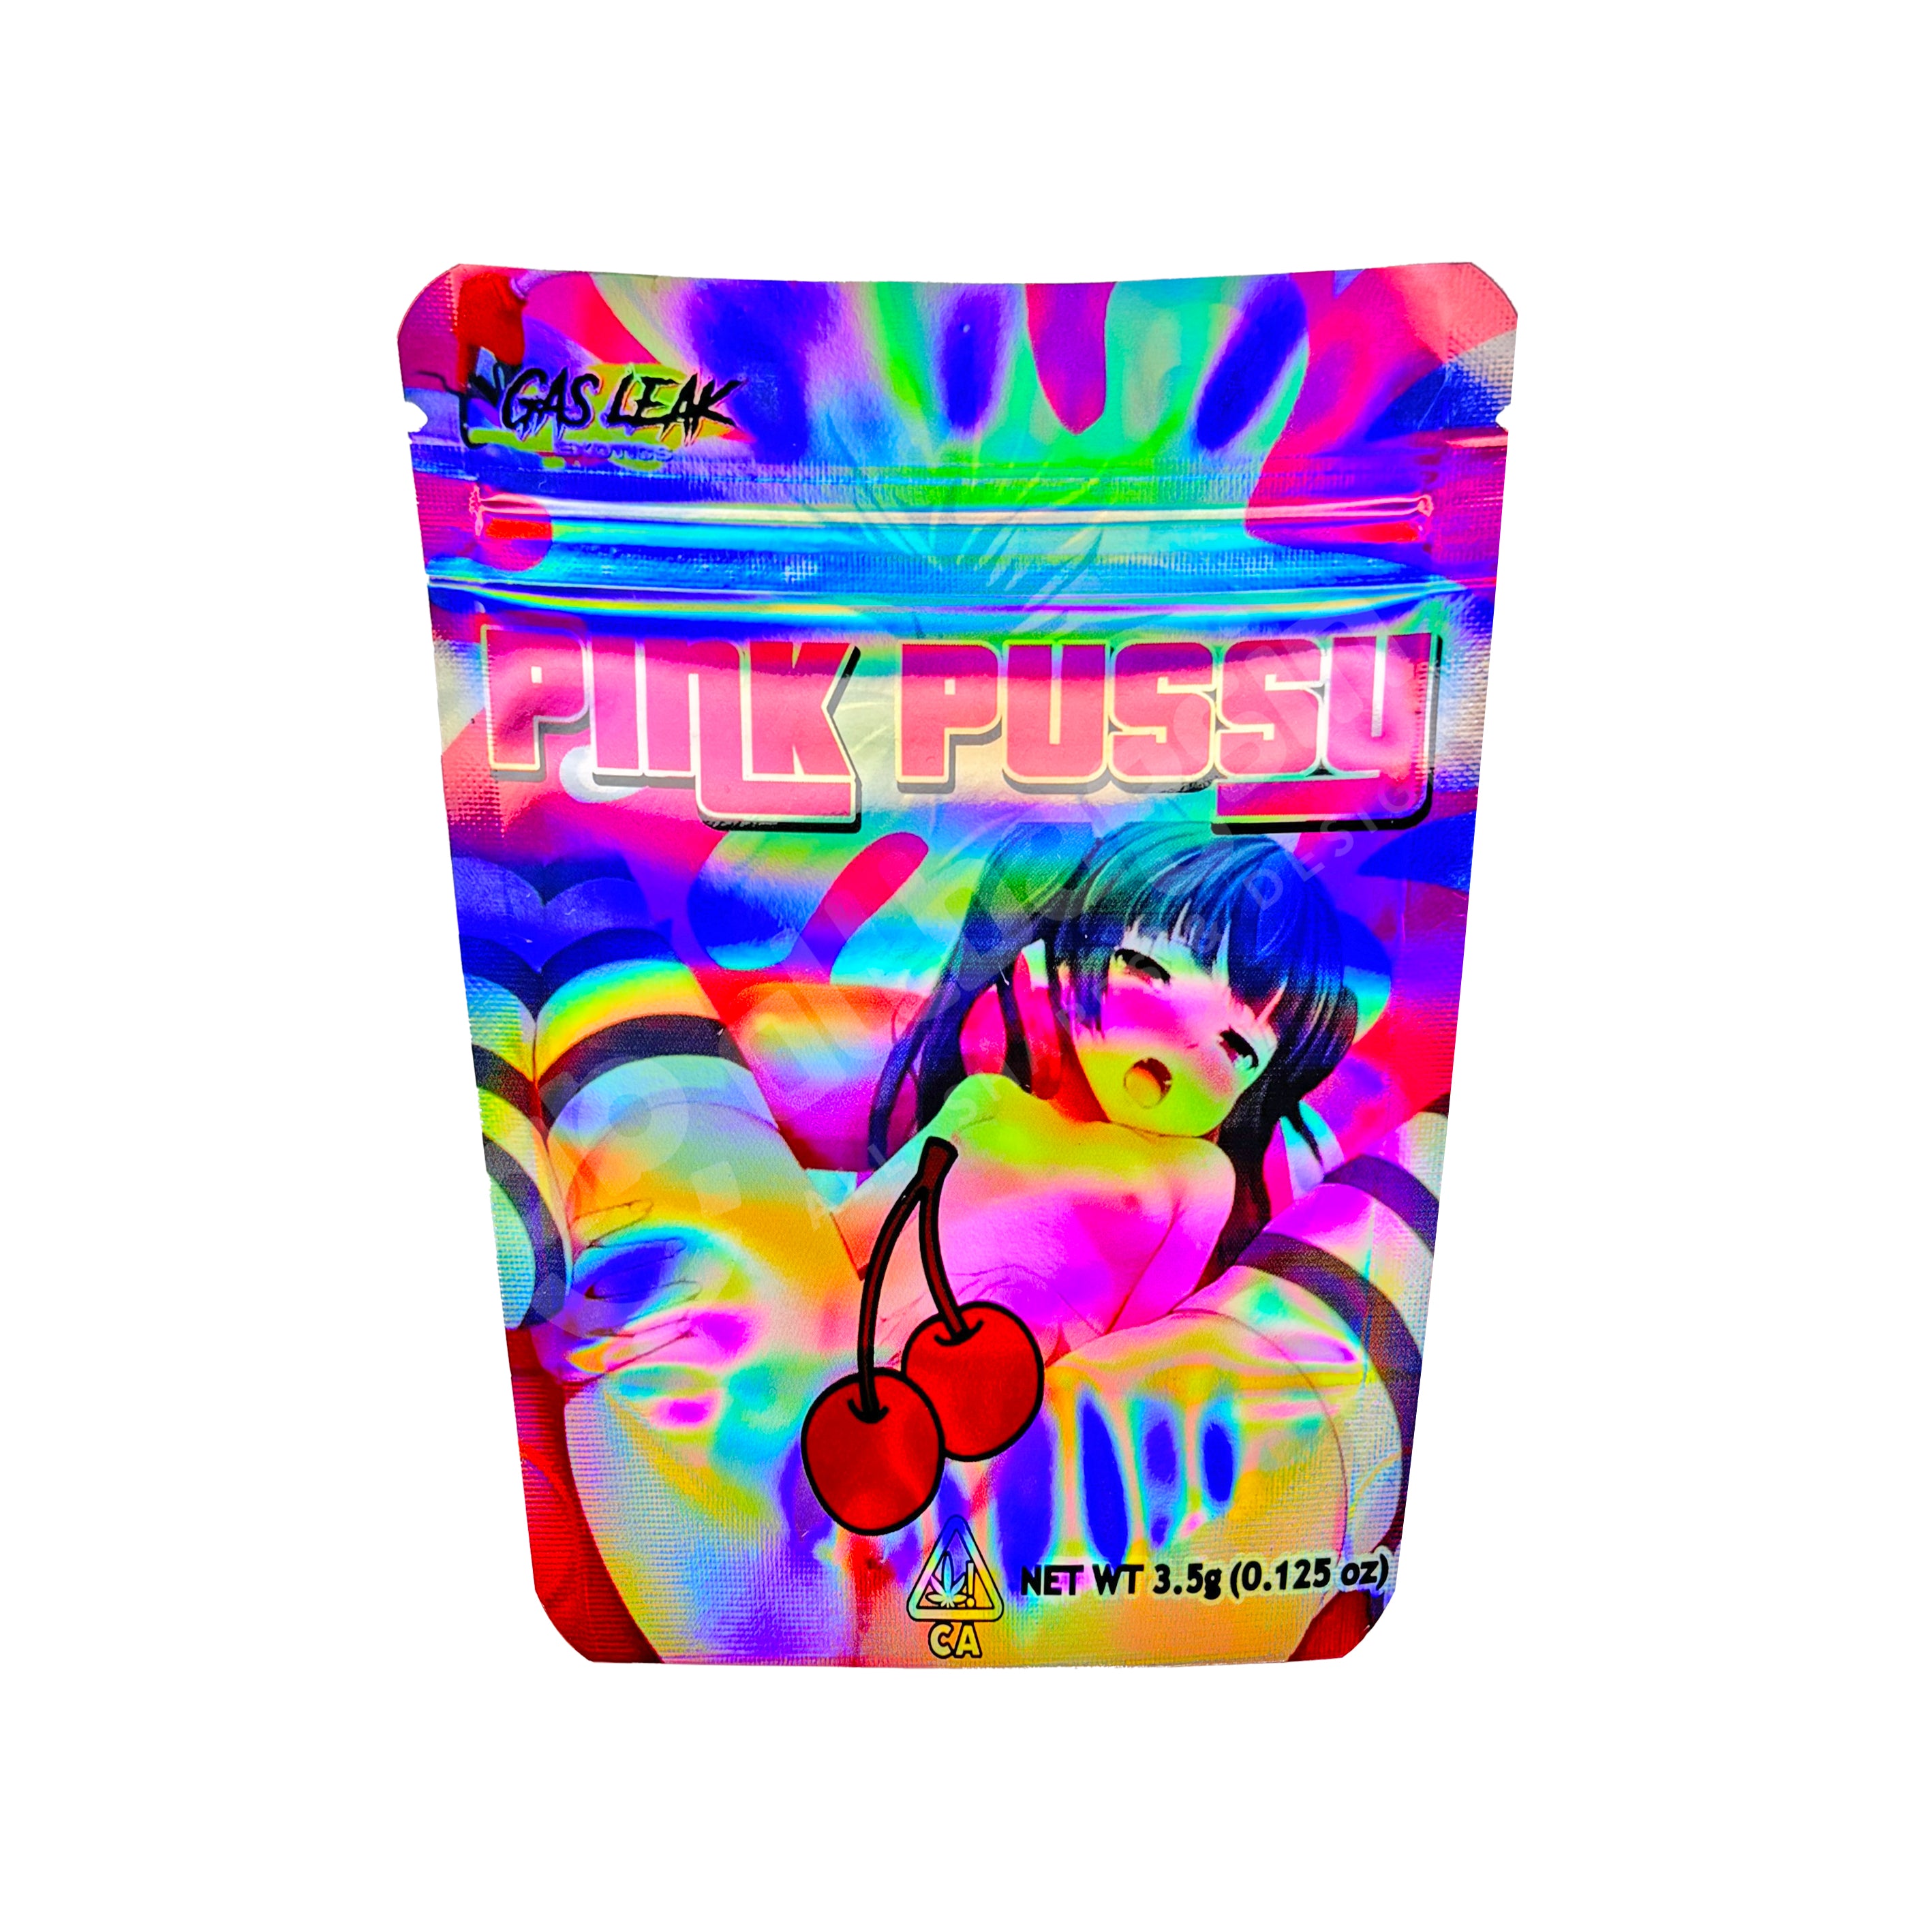 PINK PUSSY 3.5g Mylar Bags Gas Leak holographic